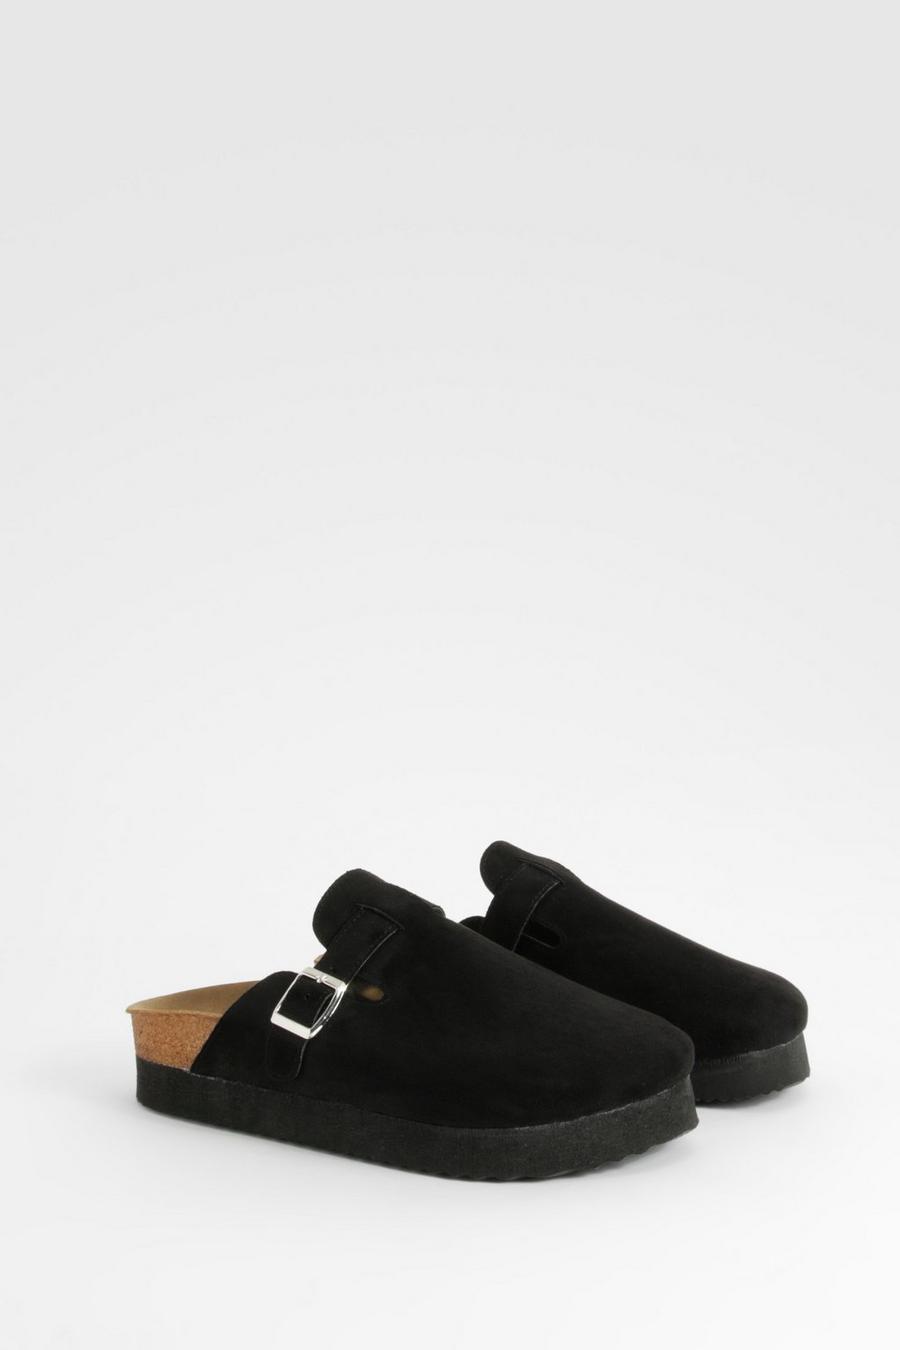 Black Flat sandals featuring leather upper with metallic hardware detailing 